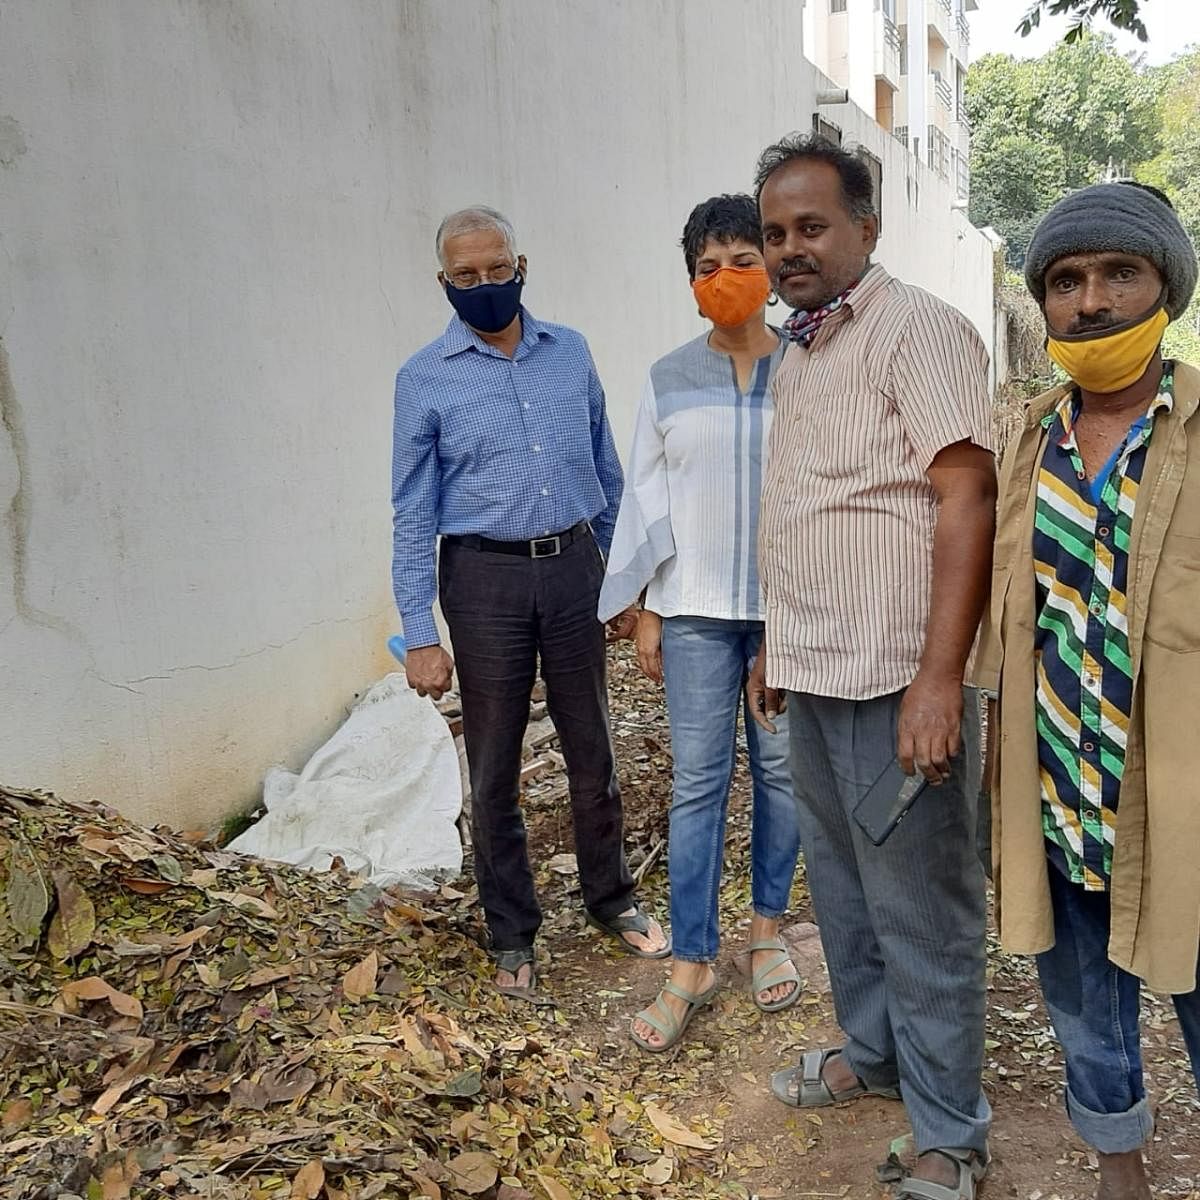 Members of the Richards Town Welfare Association KG Shashidhar (left) and Monisha Lobo with BBMP workers at the segregation and packaging site for dry leaves.